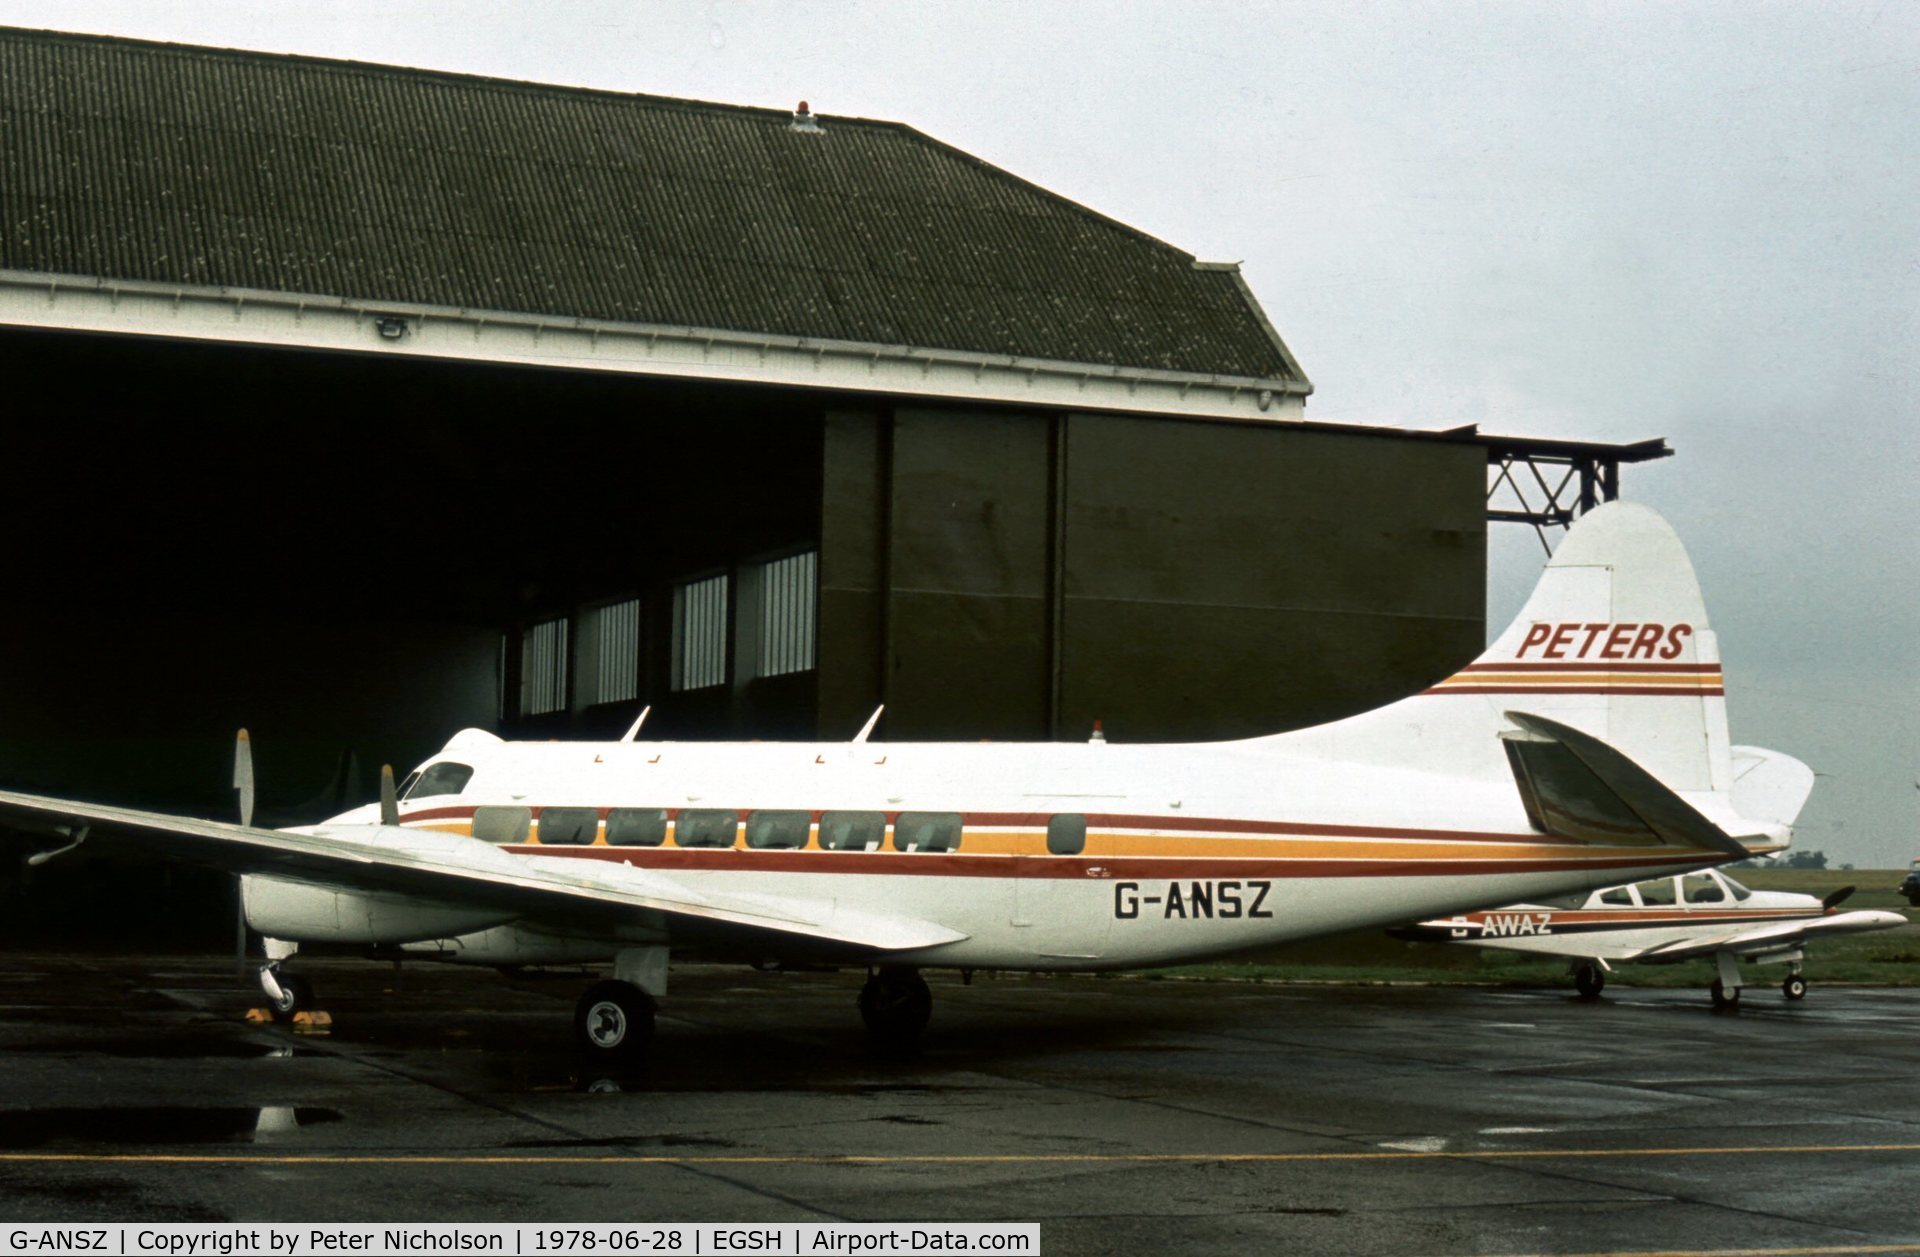 G-ANSZ, 1954 De Havilland DH-114 Heron 1B C/N 14047, In 1978 this was one of four Herons operated by Peters Aviation on general charter services at Norwich Airport.